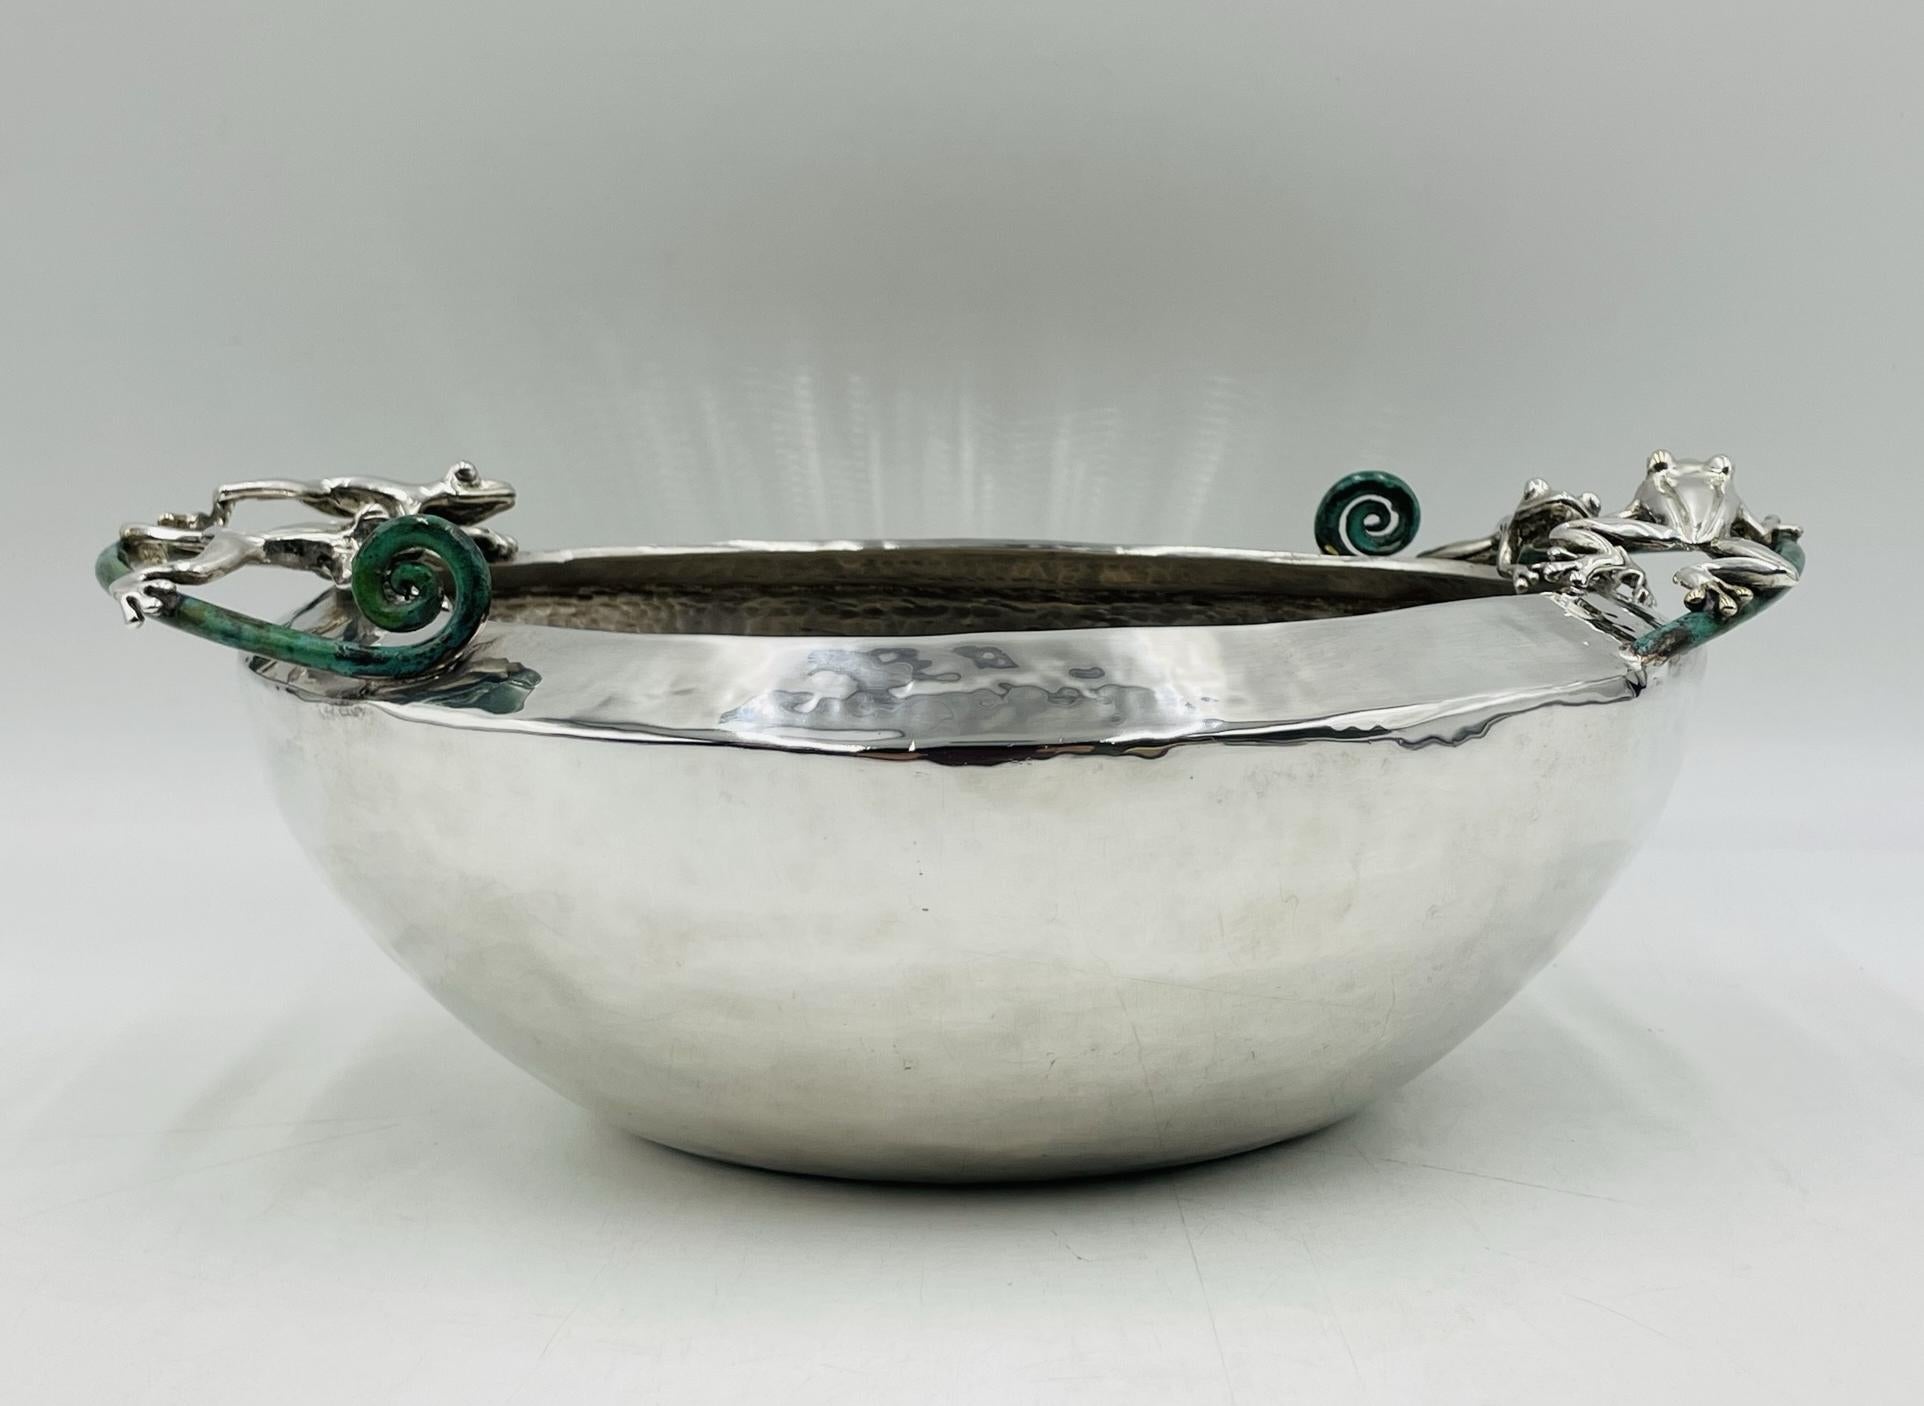 Elevate your dining experience with this exquisite Large Silver-Plated Bowl with Frog Handles by renowned Mexican artist Emilia Castillo. Hand crafted in Taxco Guerrero at the shop of Emilia Castillo by skilled artisans, this stunning piece features